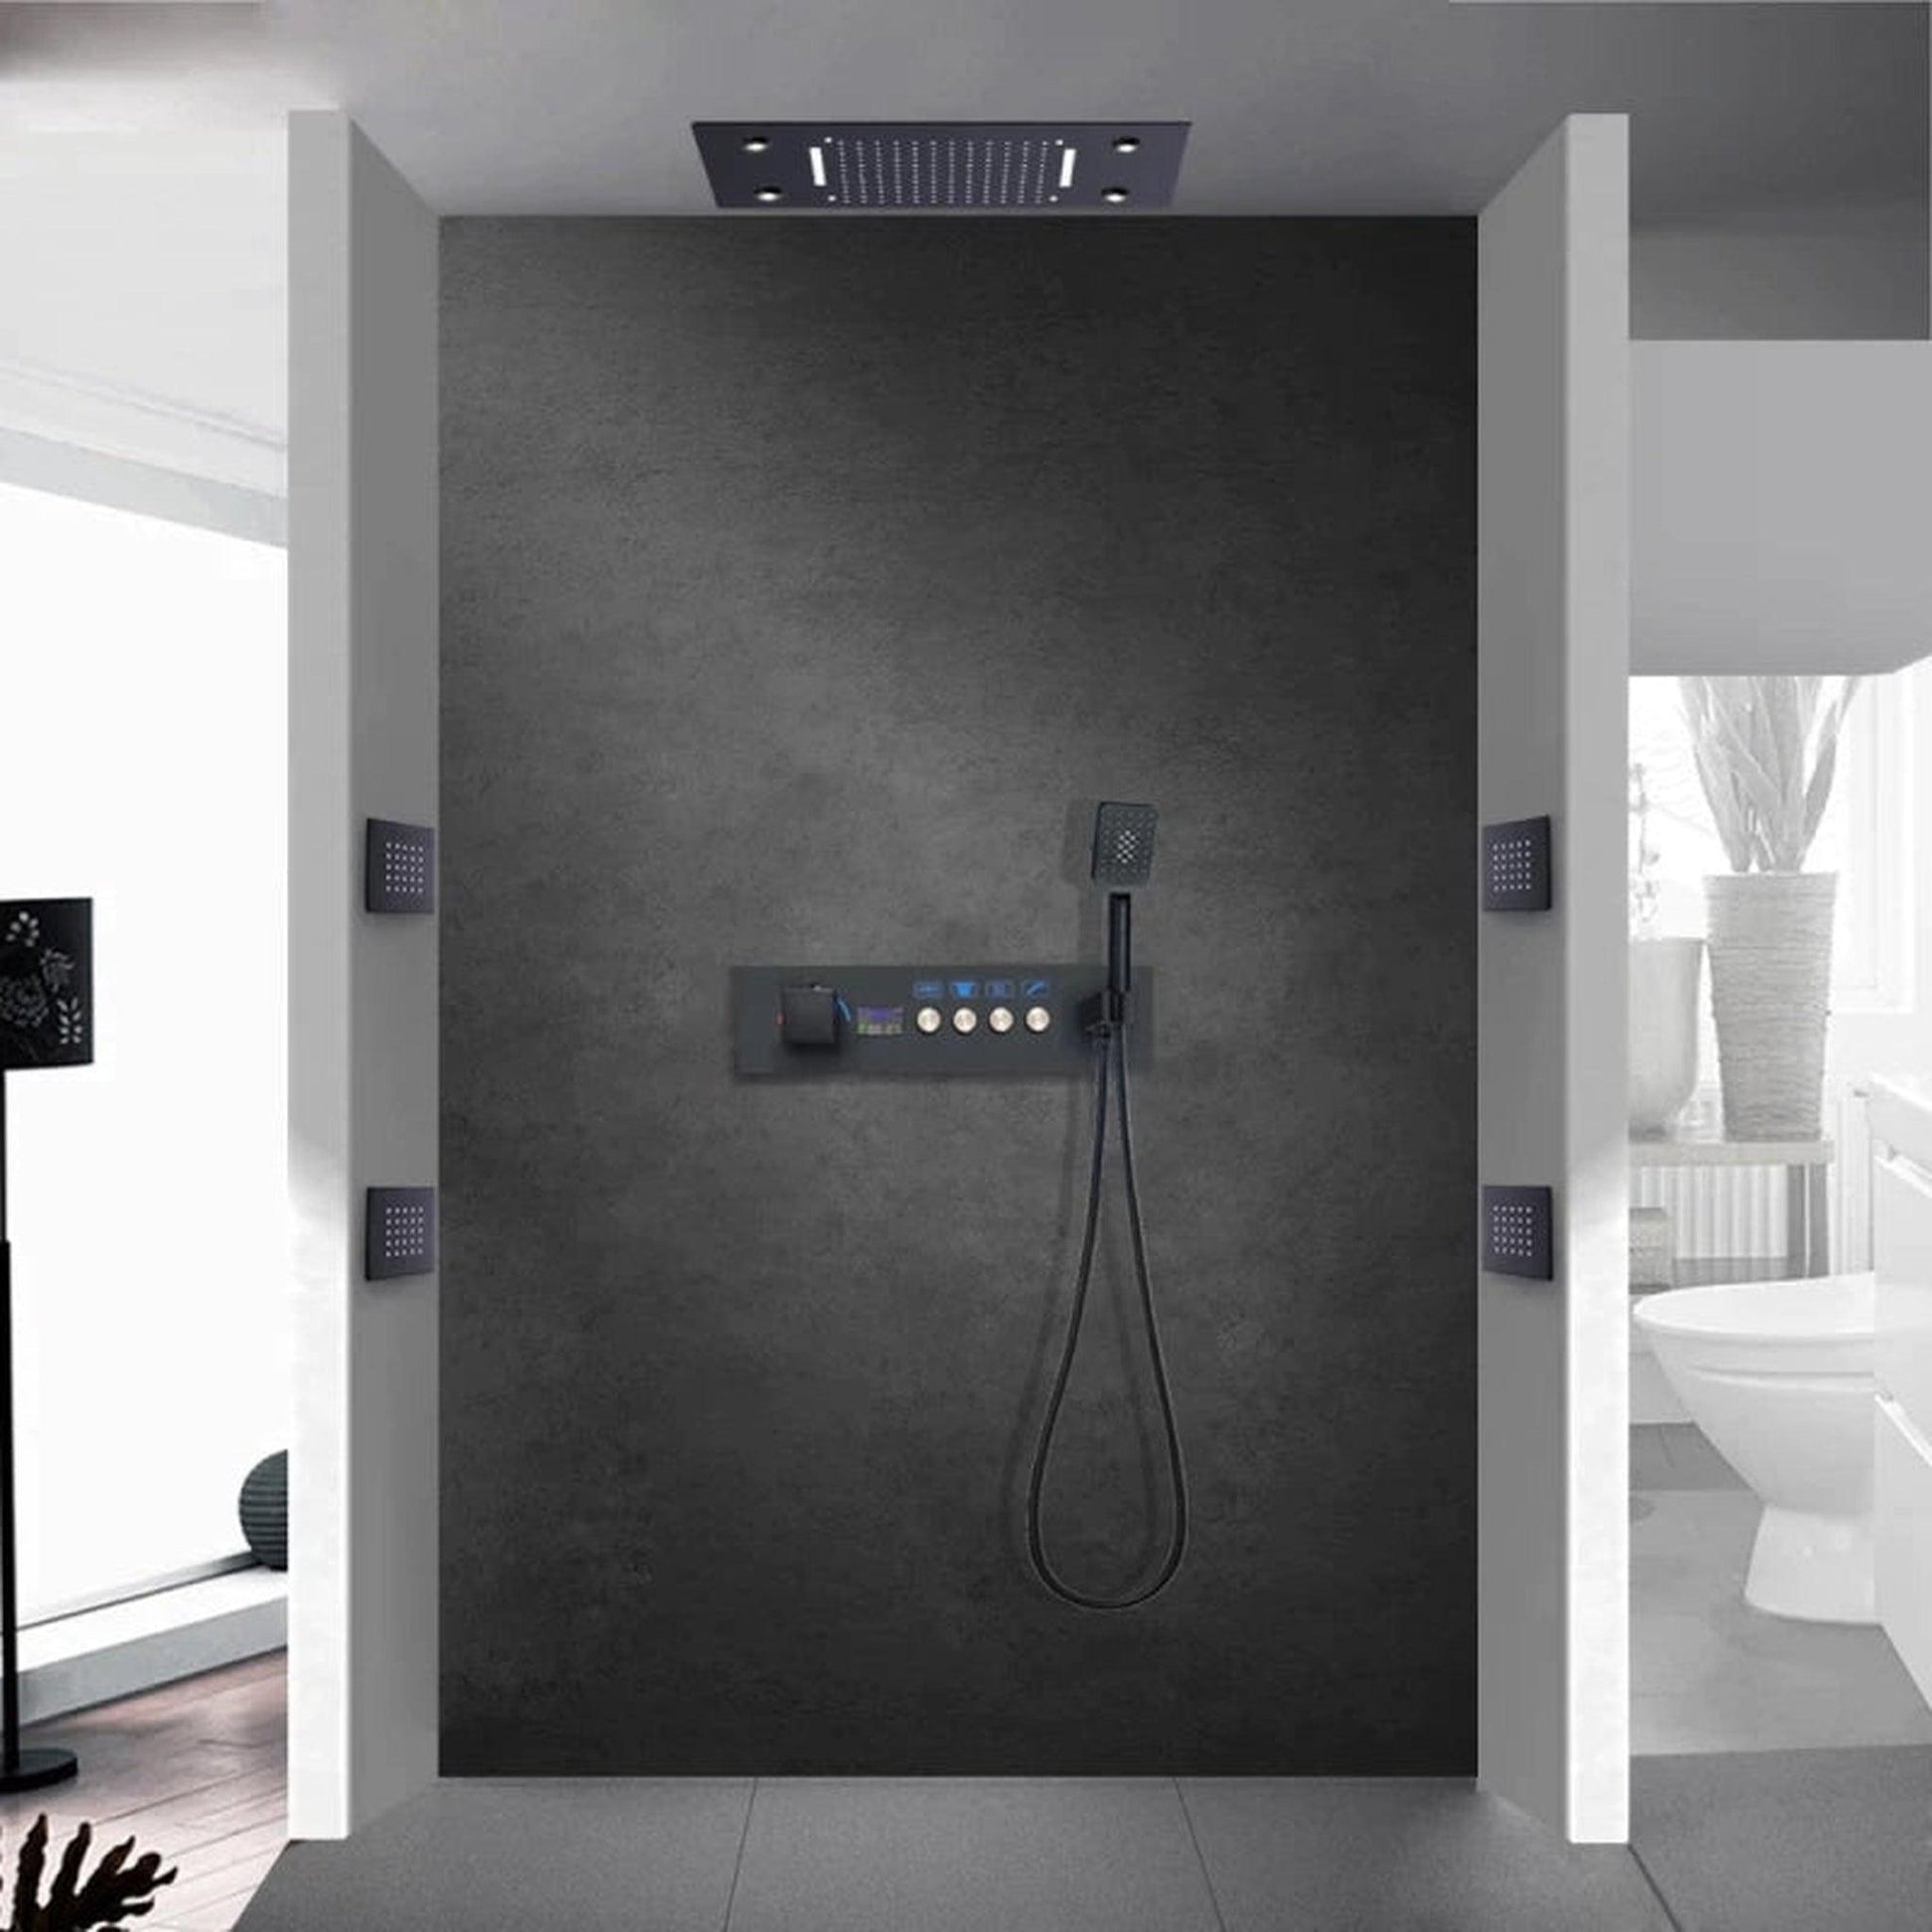 Fontana Venice Matte Black Ceiling Mounted LED Musical Thermostatic Waterfall Shower System With 4-Body Jets and Hand Shower